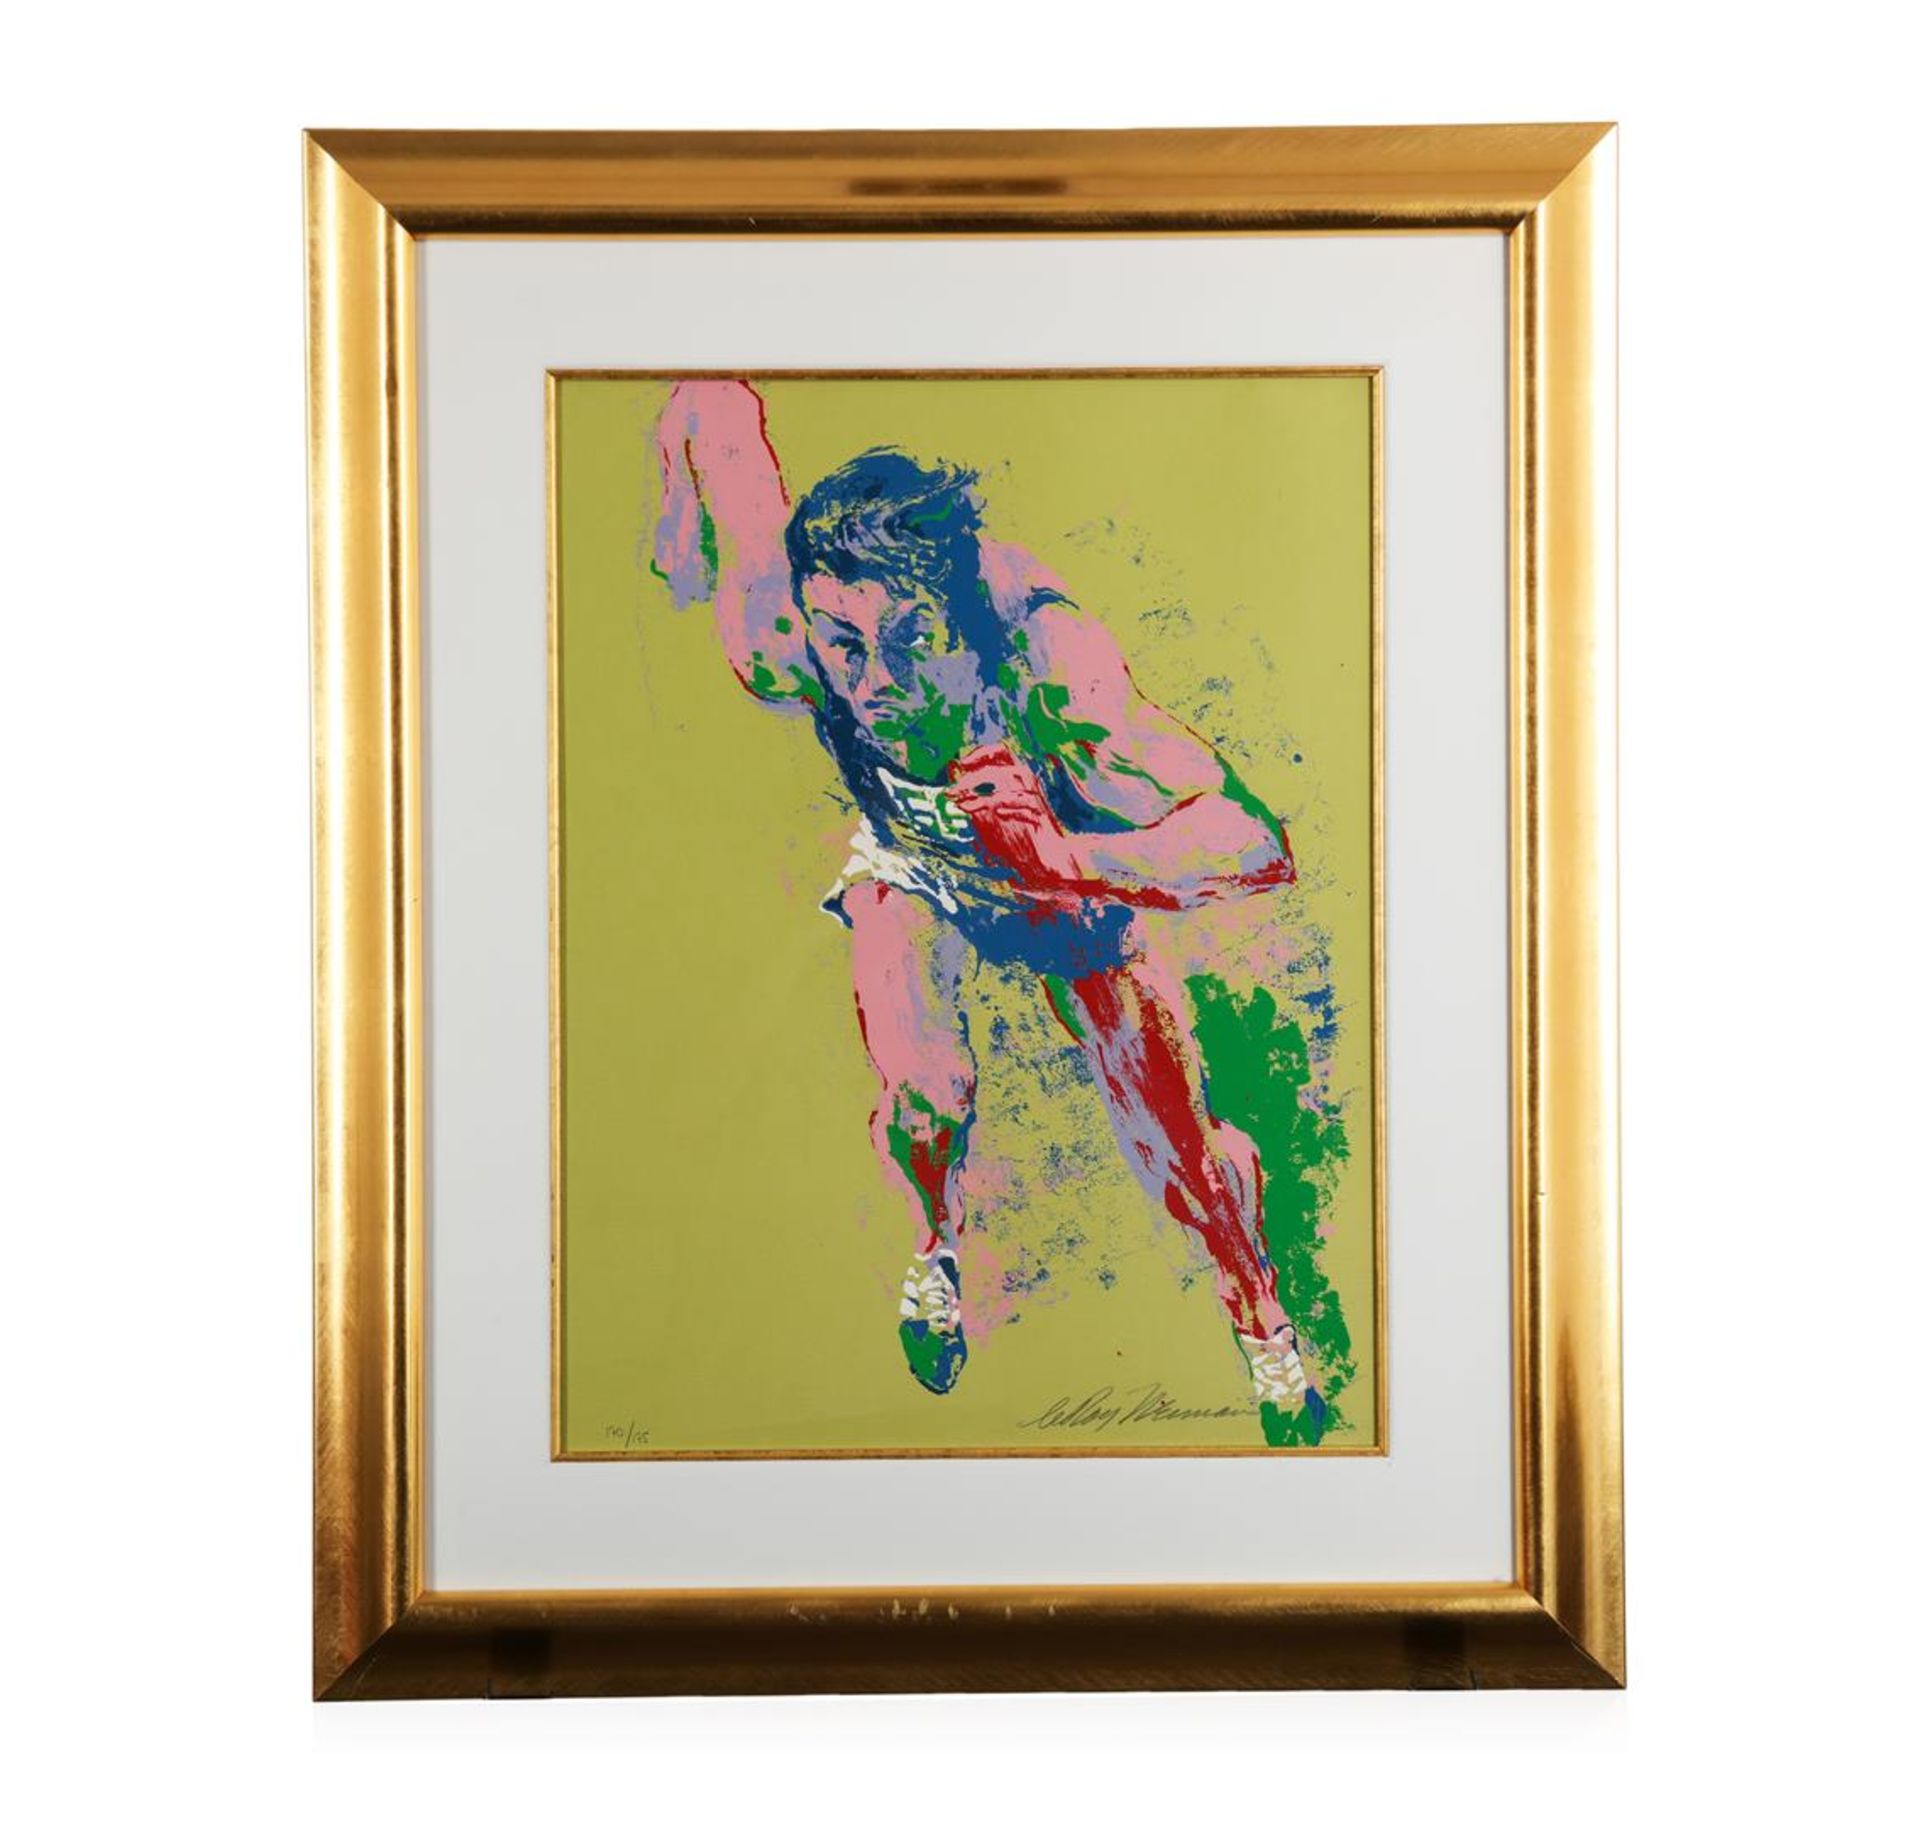 "Olympic Runner" by LeRoy Neiman - Limited Edition Serigraph